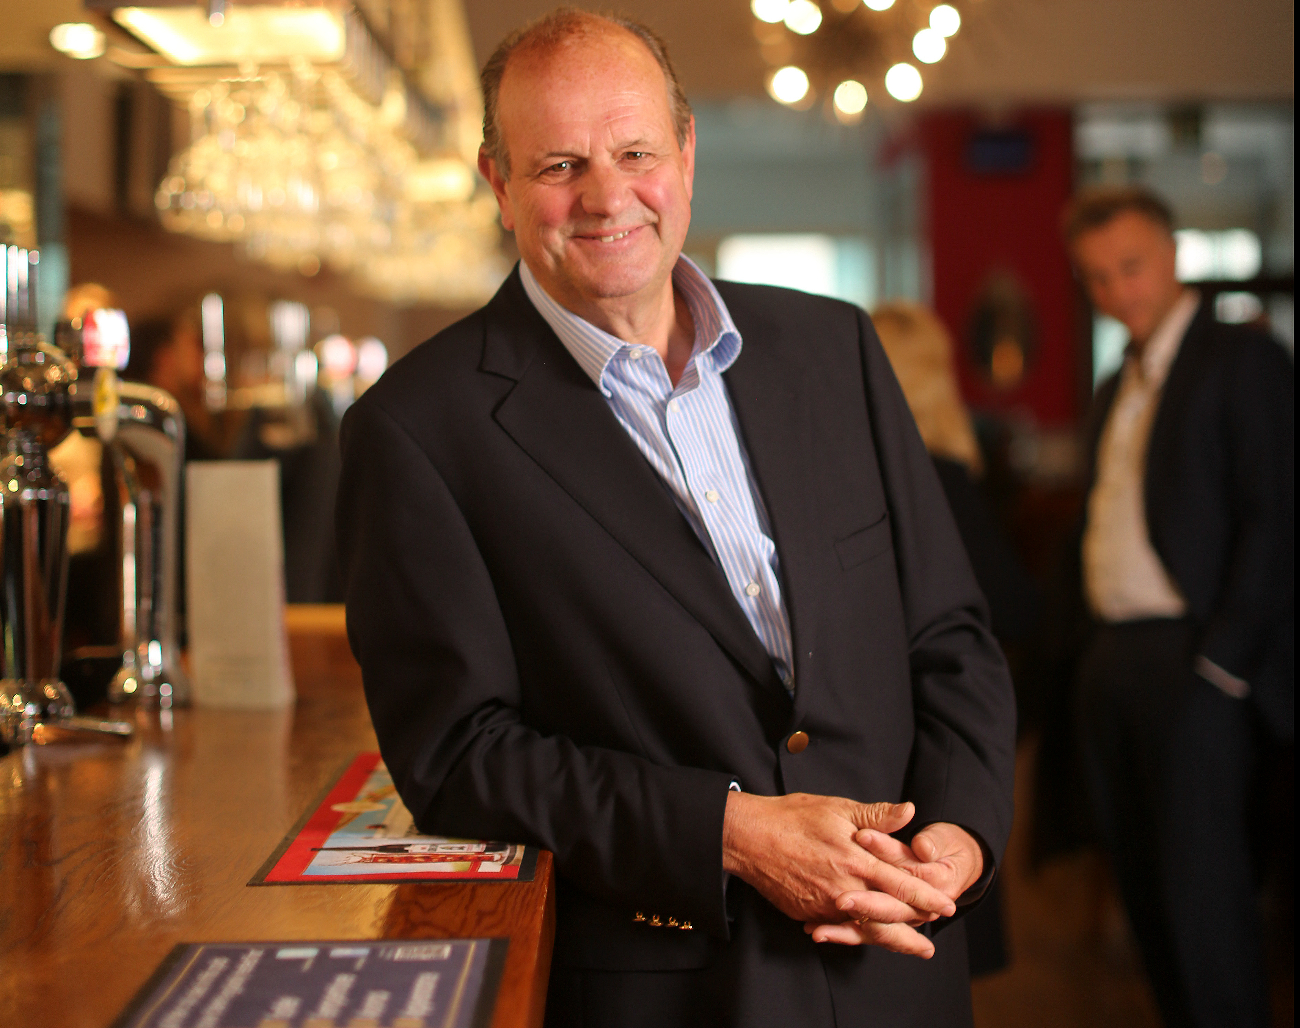 ‘Last call’ — Stonegate pubs founder to step down